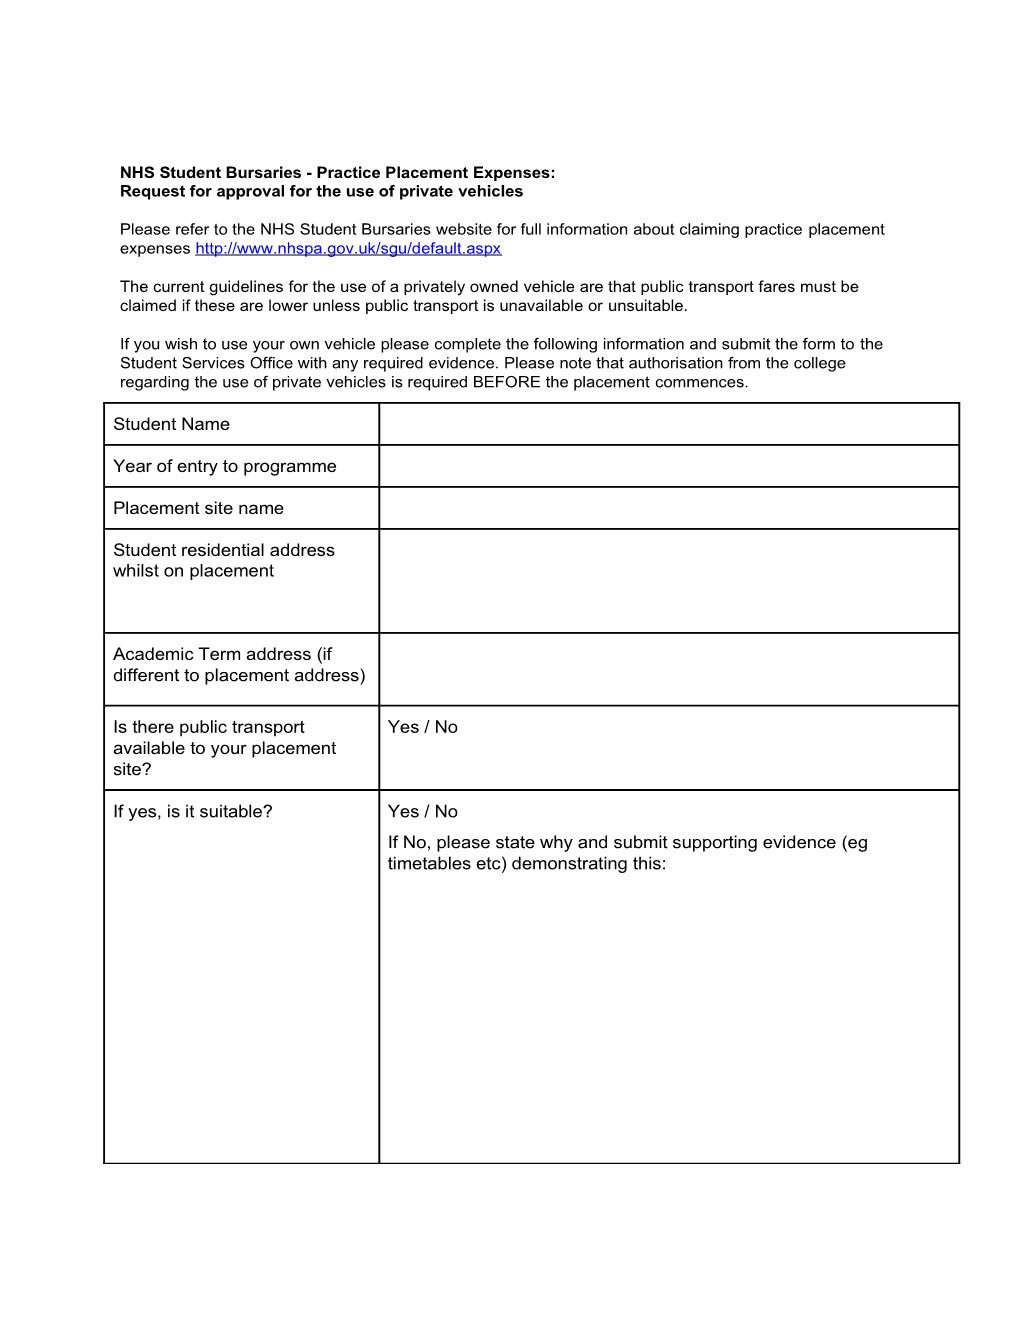 NHS Student Bursaries - Practice Placementexpenses:Request for Approval for the Use Of